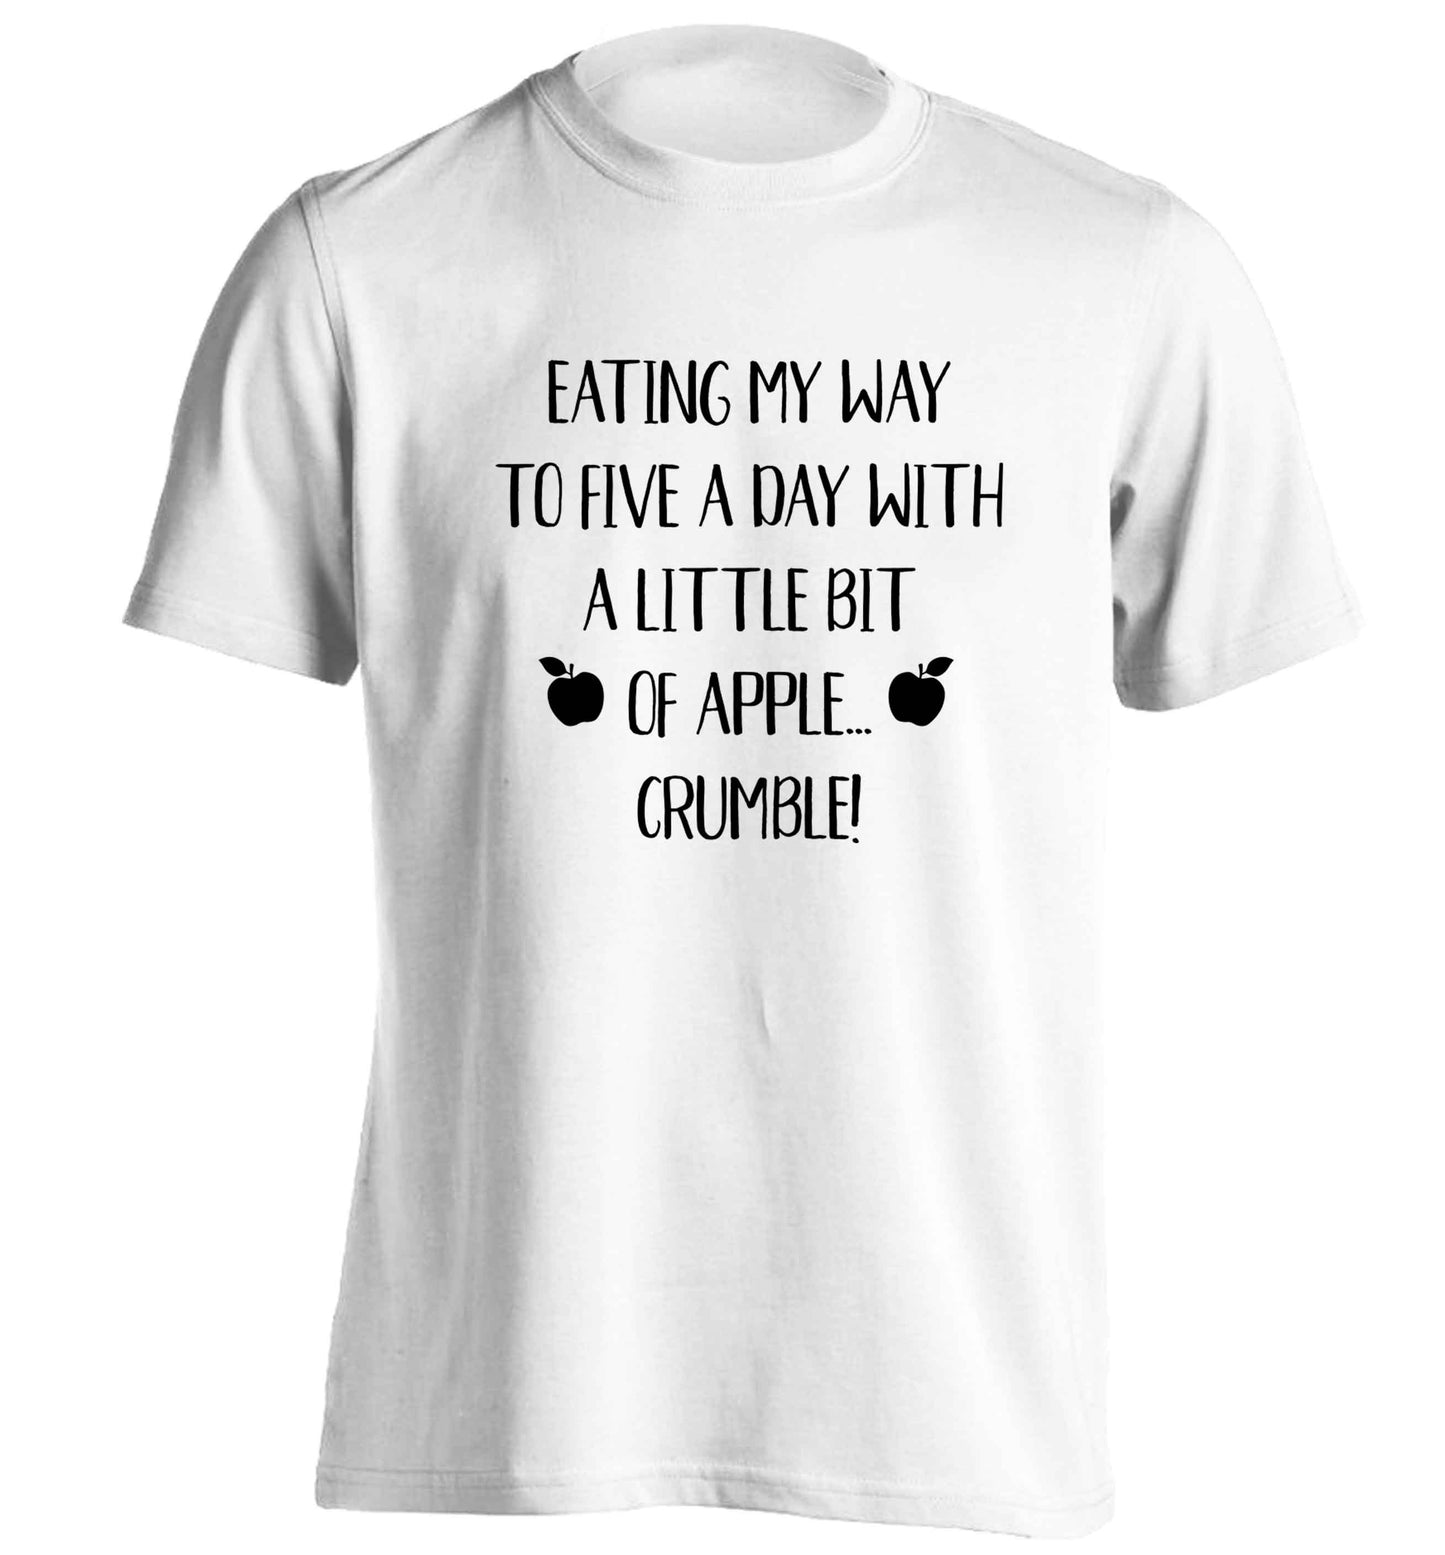 Eating my way to five a day with a little bit of apple crumble adults unisex white Tshirt 2XL